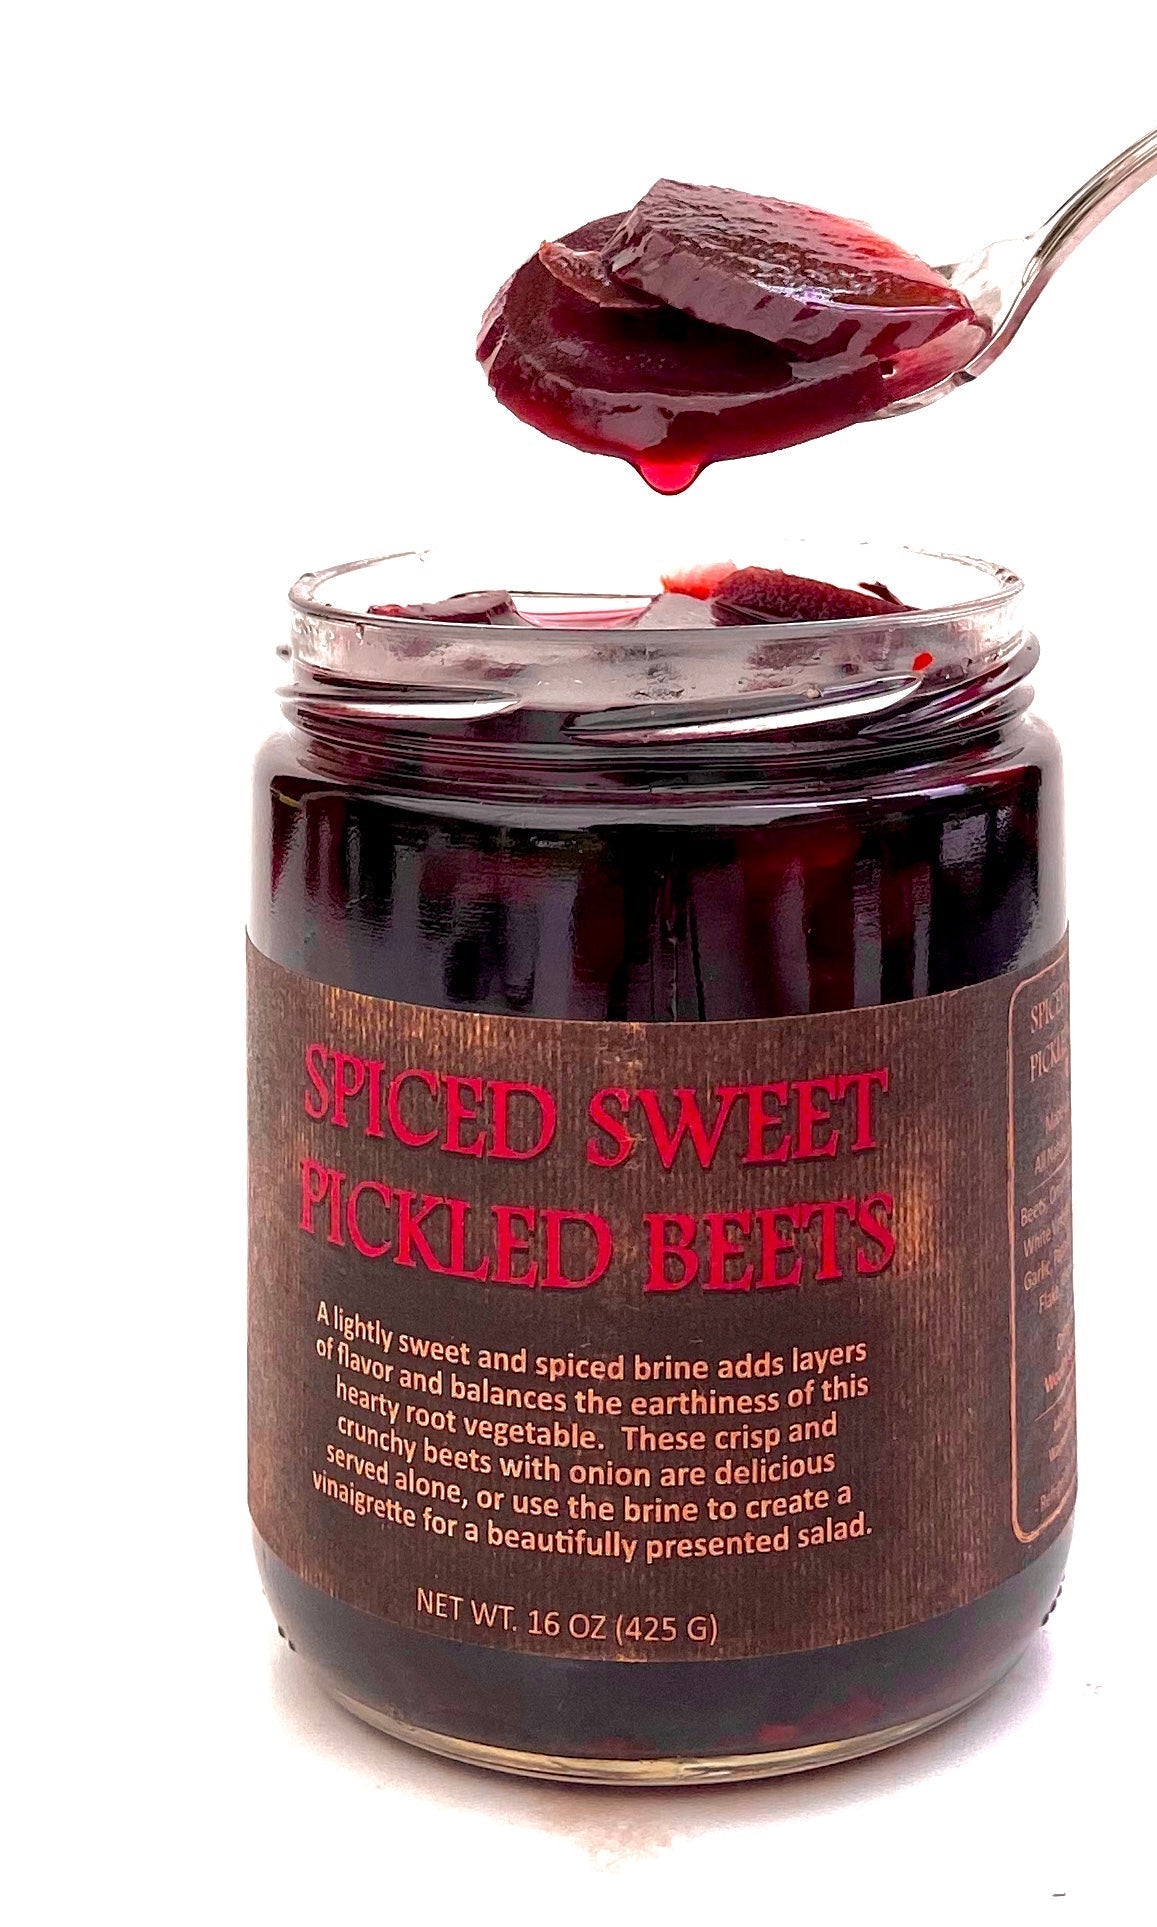 Copper Pot & Wooden Spoon Spiced Sweet Pickled Beets